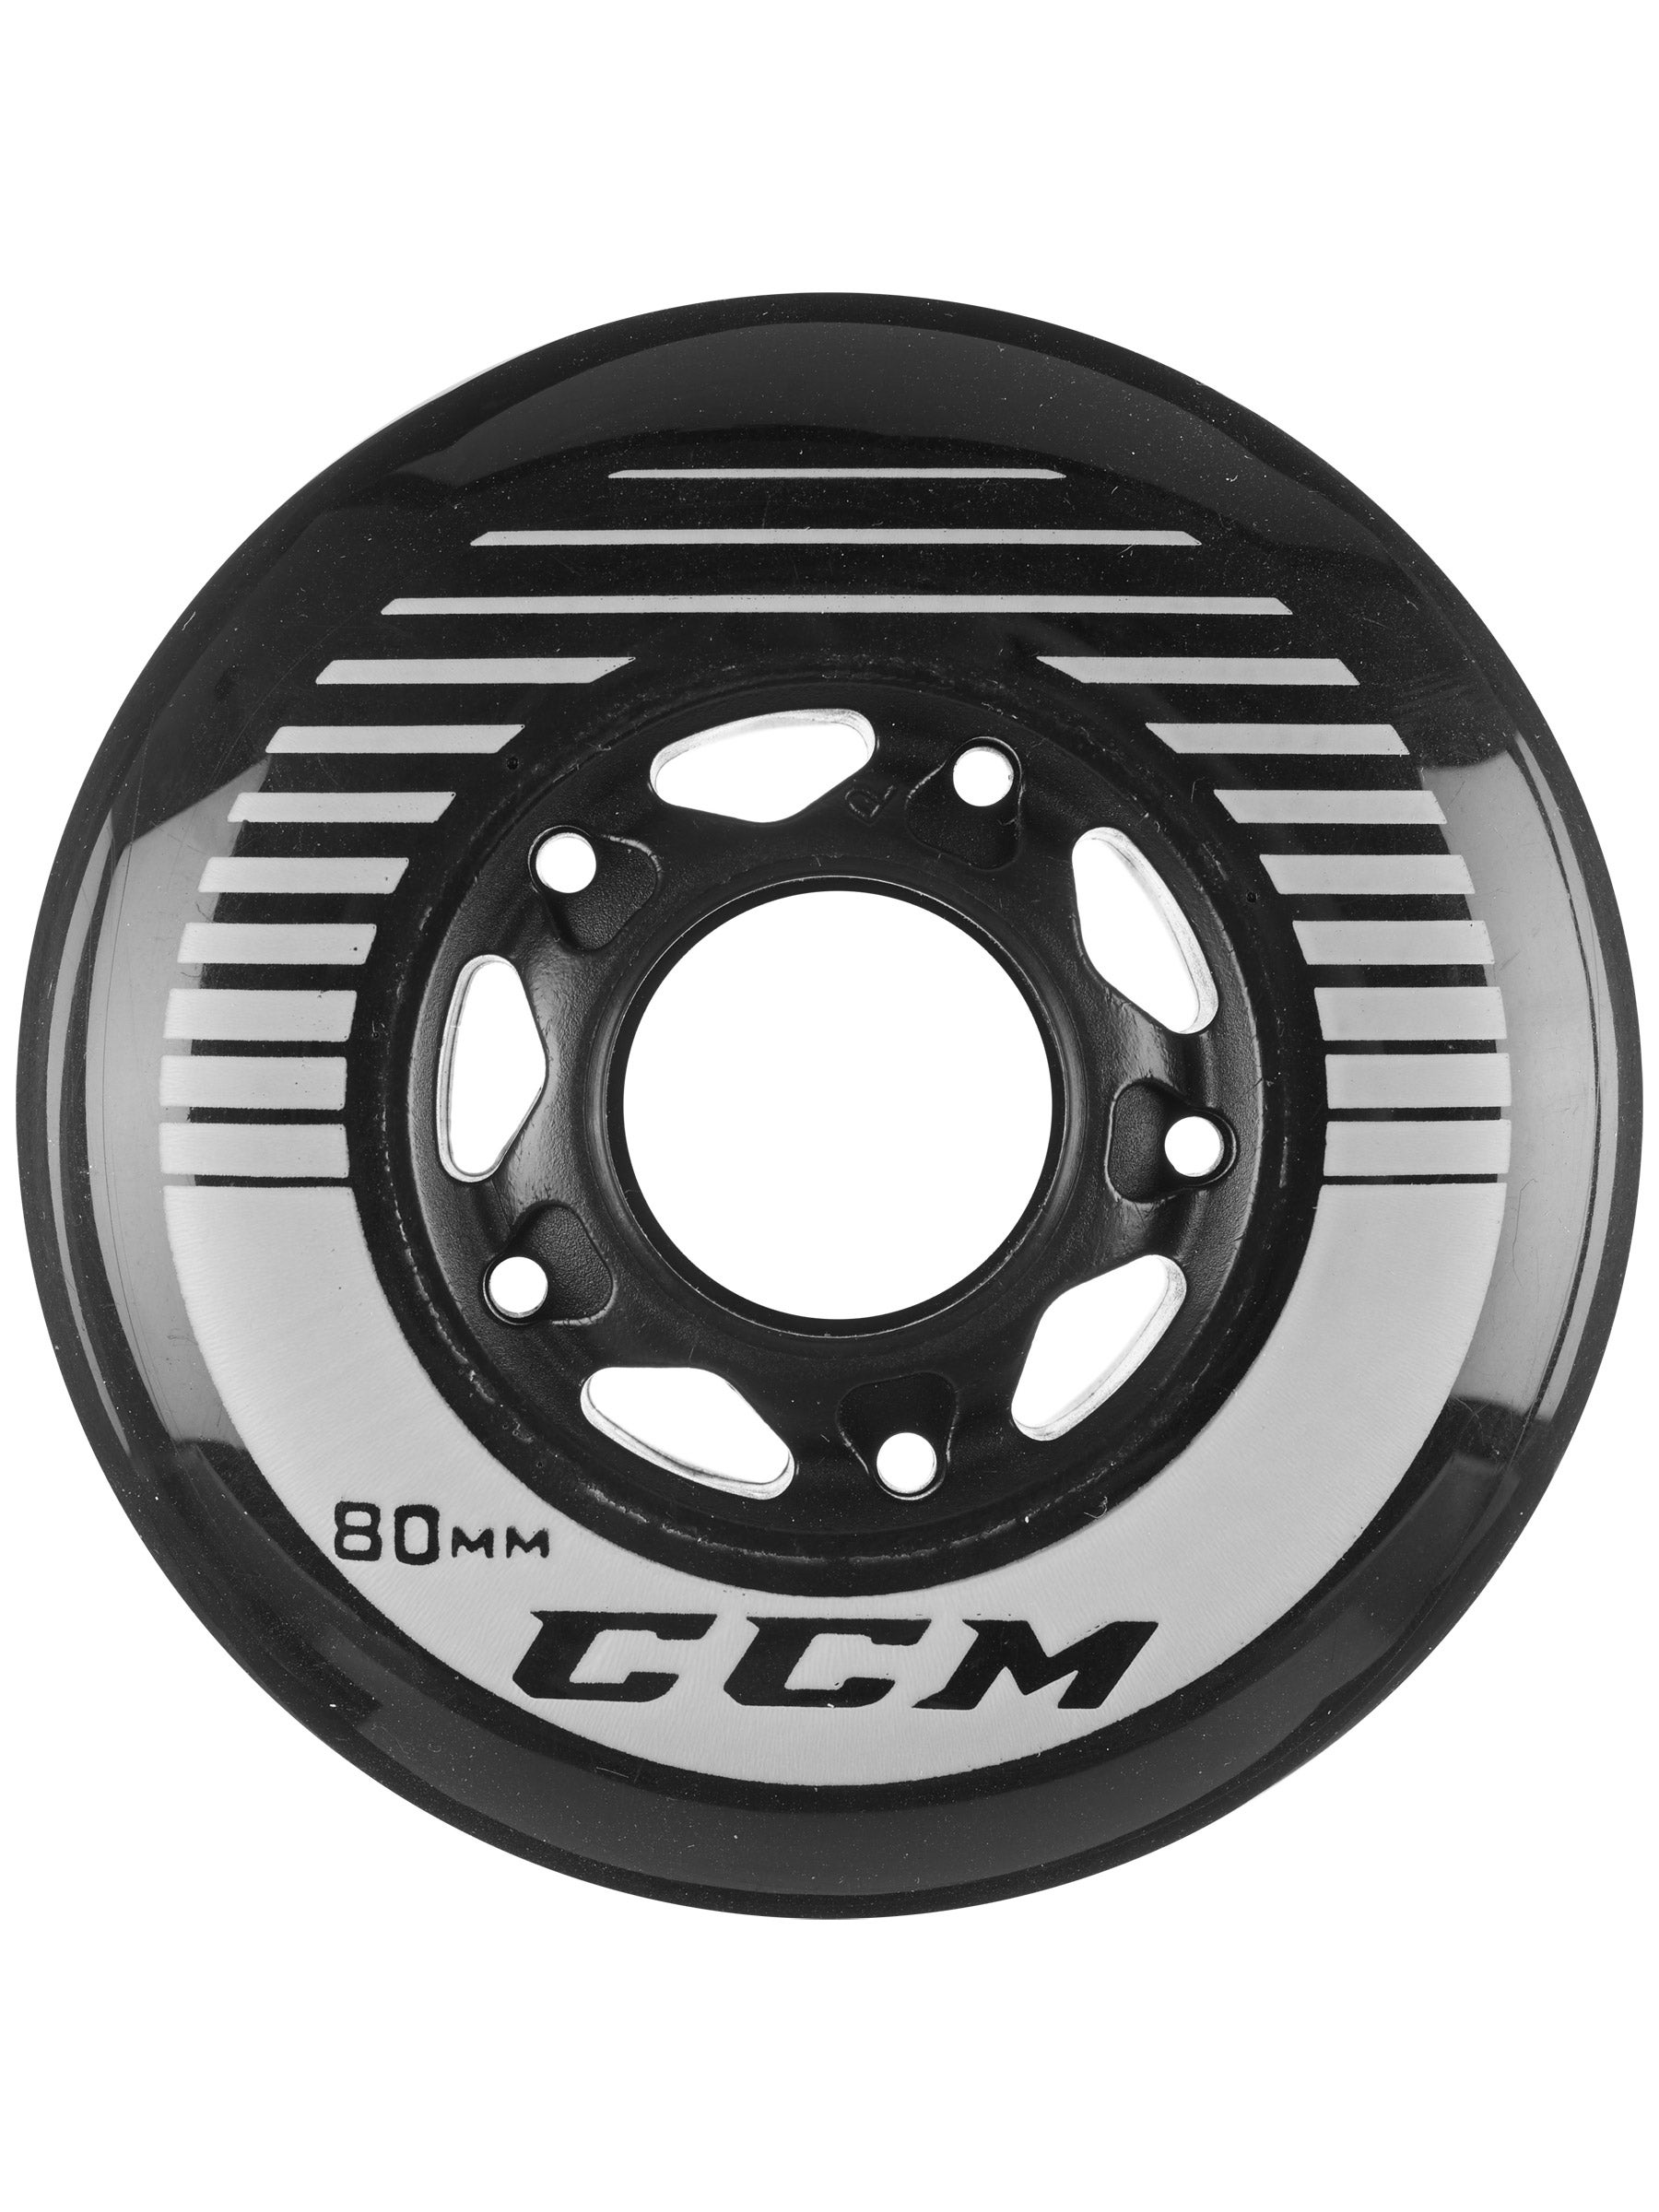 4 Wheels Details about   60mm x 88a or 85a Hockey Wheel works well as replacement for 59mm 